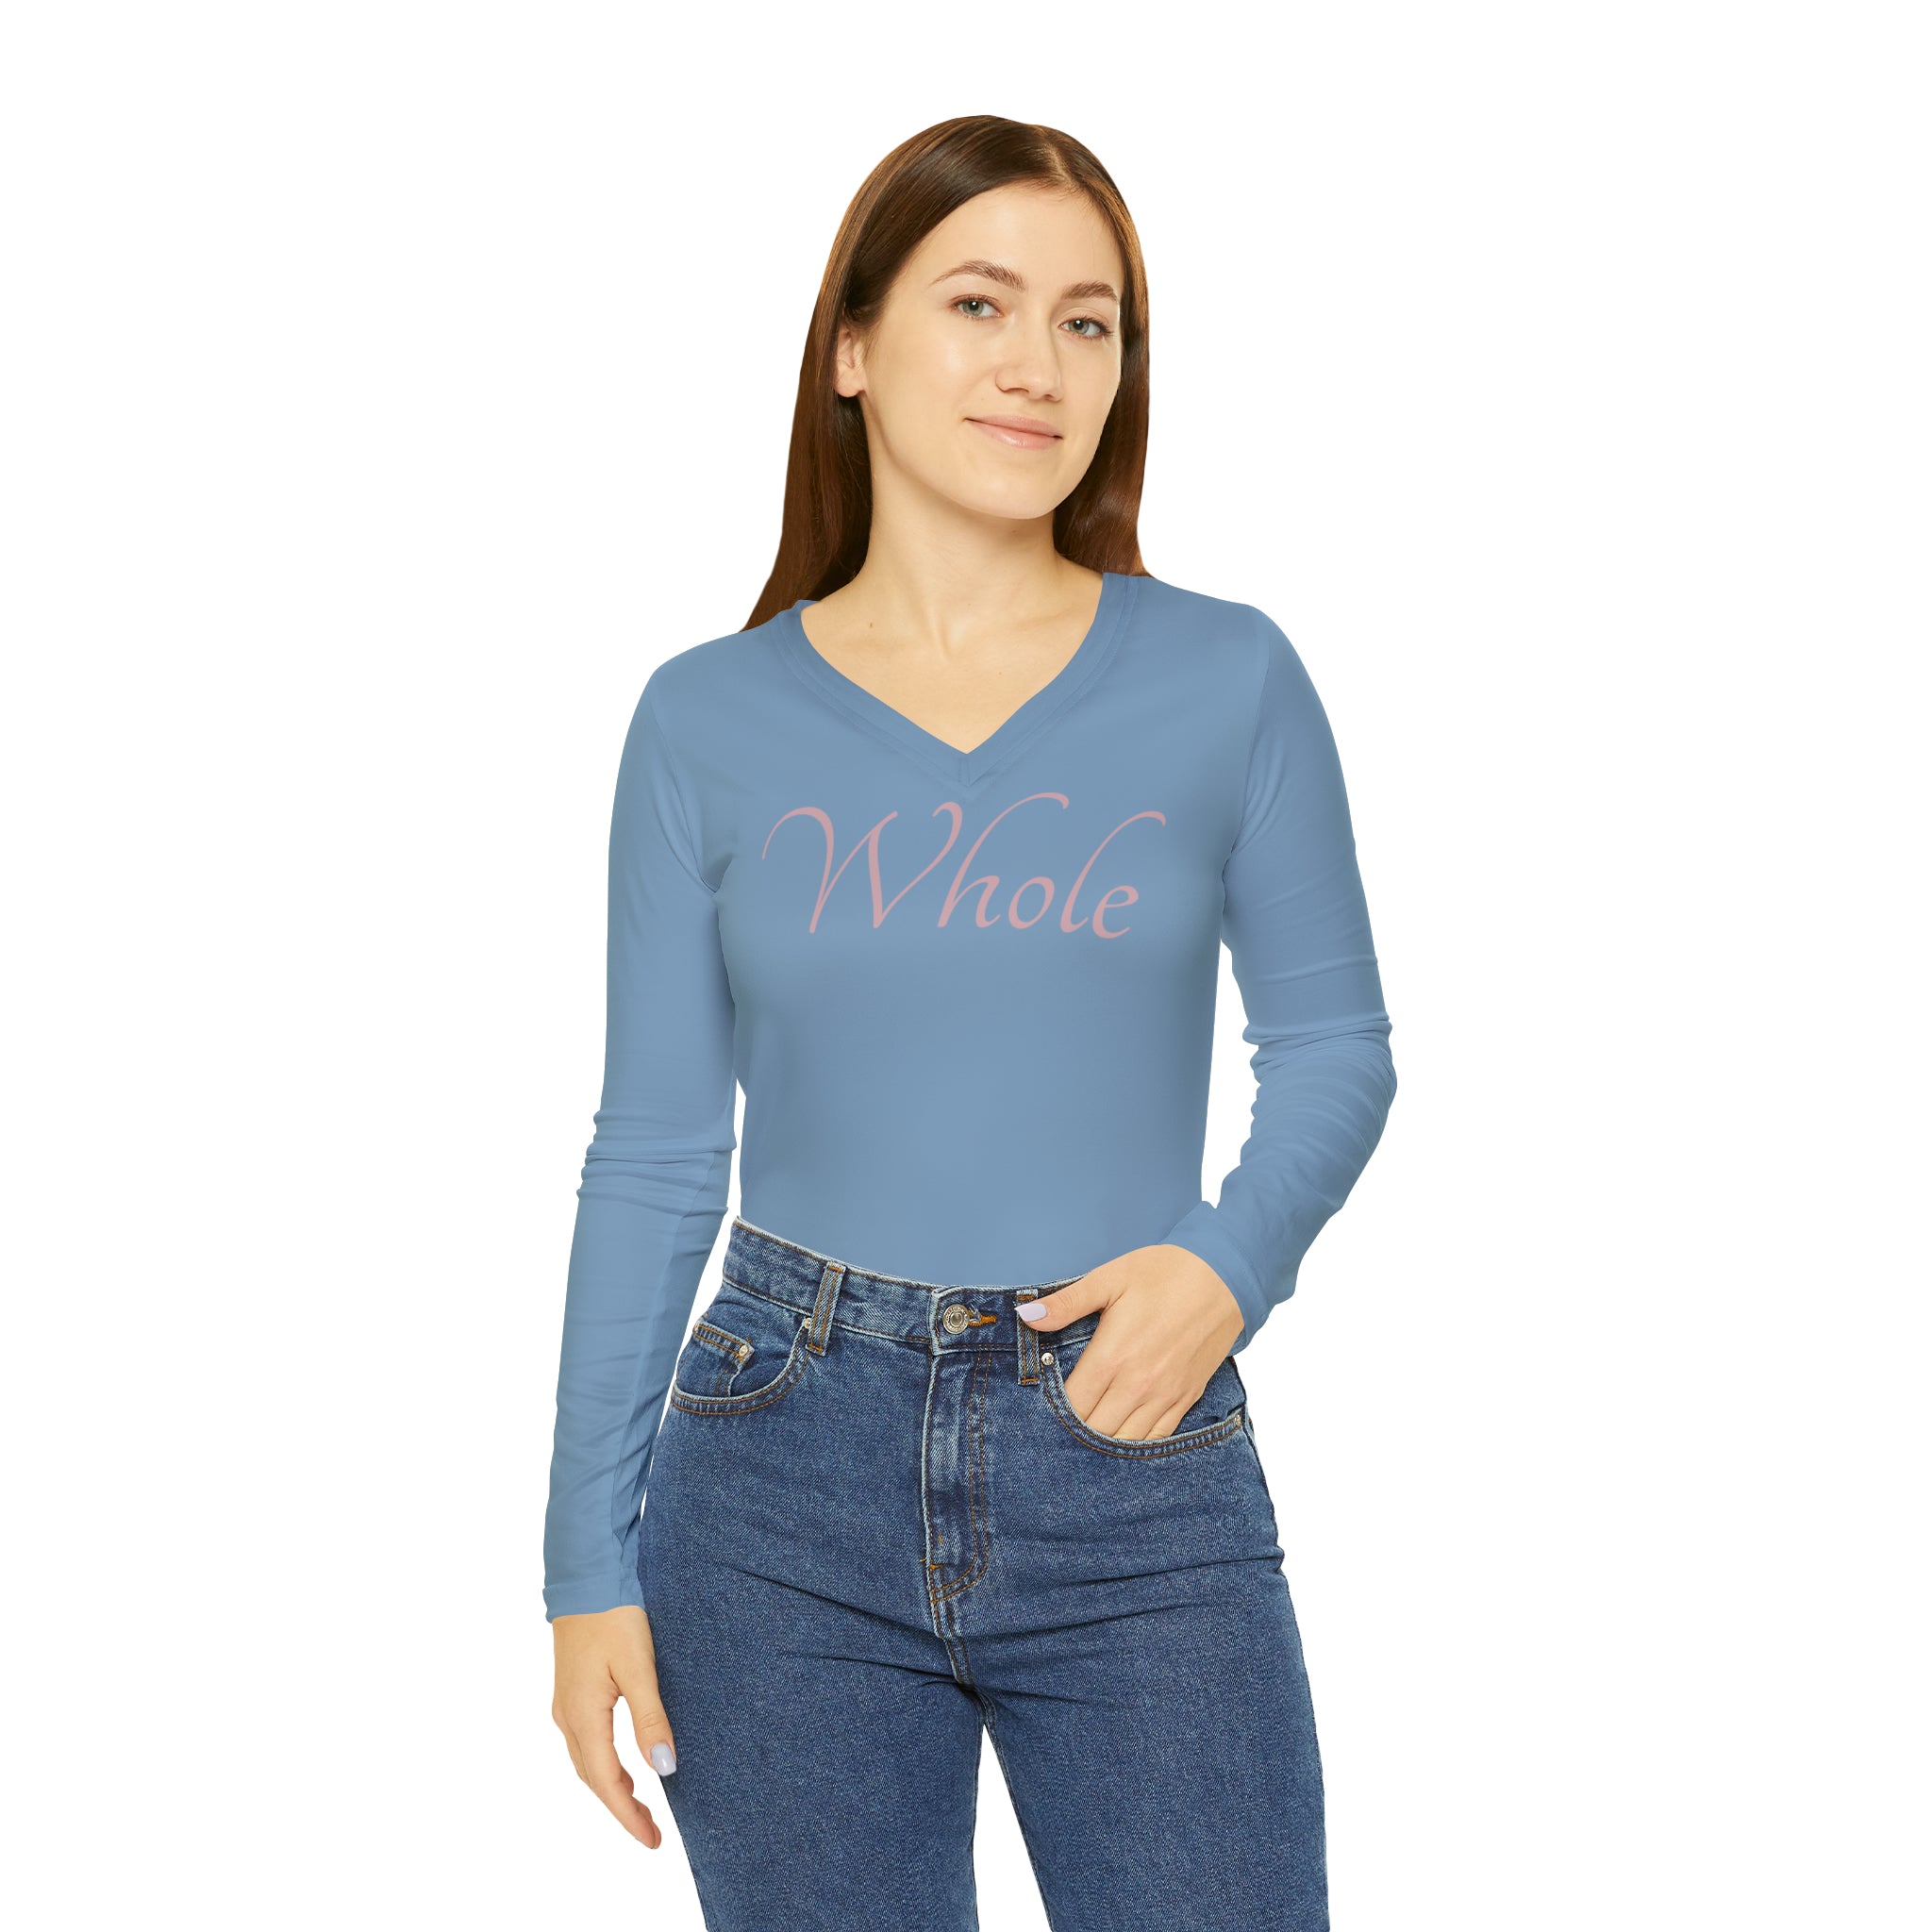 Whole Awareness Long Sleeve V-neck Casual Shirt Double Needle Stitching Everyday Wear Mental Health Donation Polyester Spandex Blend Statement Shirt Whole Shirt All Over Prints 4281388214345218866_2048 Printify